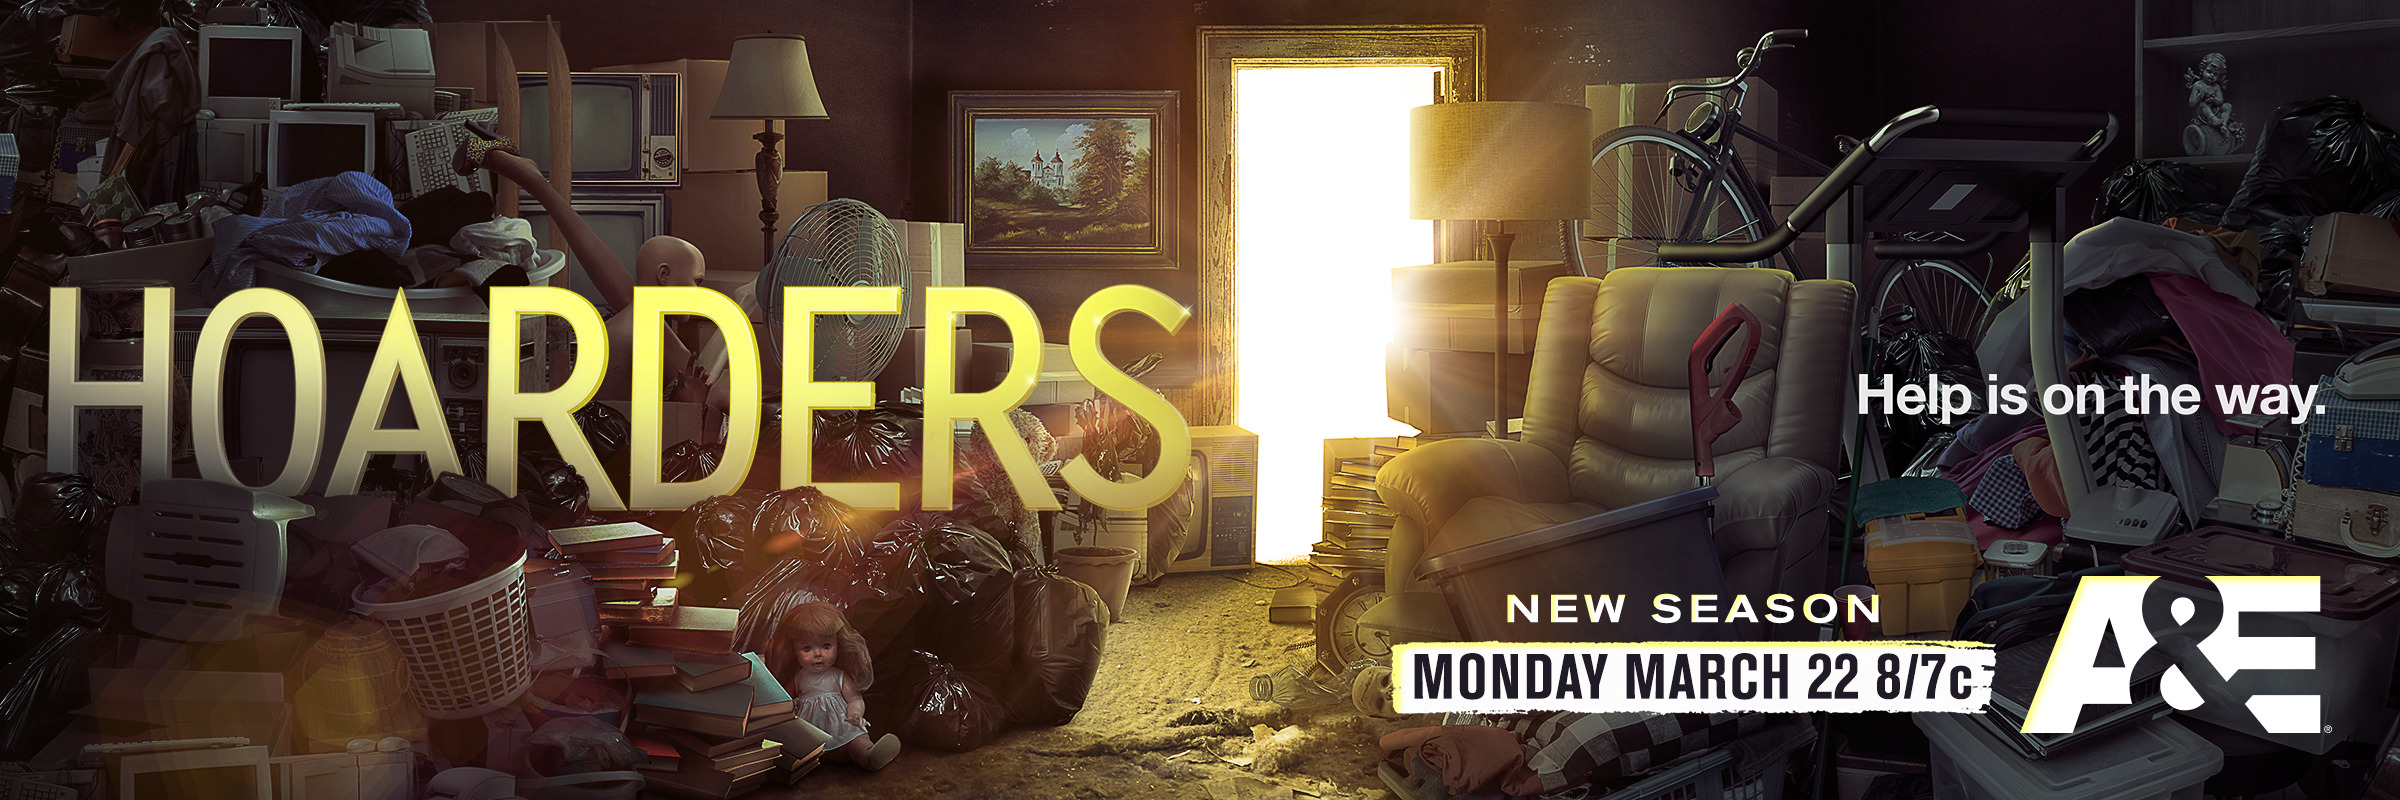 Mega Sized Movie Poster Image for Hoarders (#4 of 5)